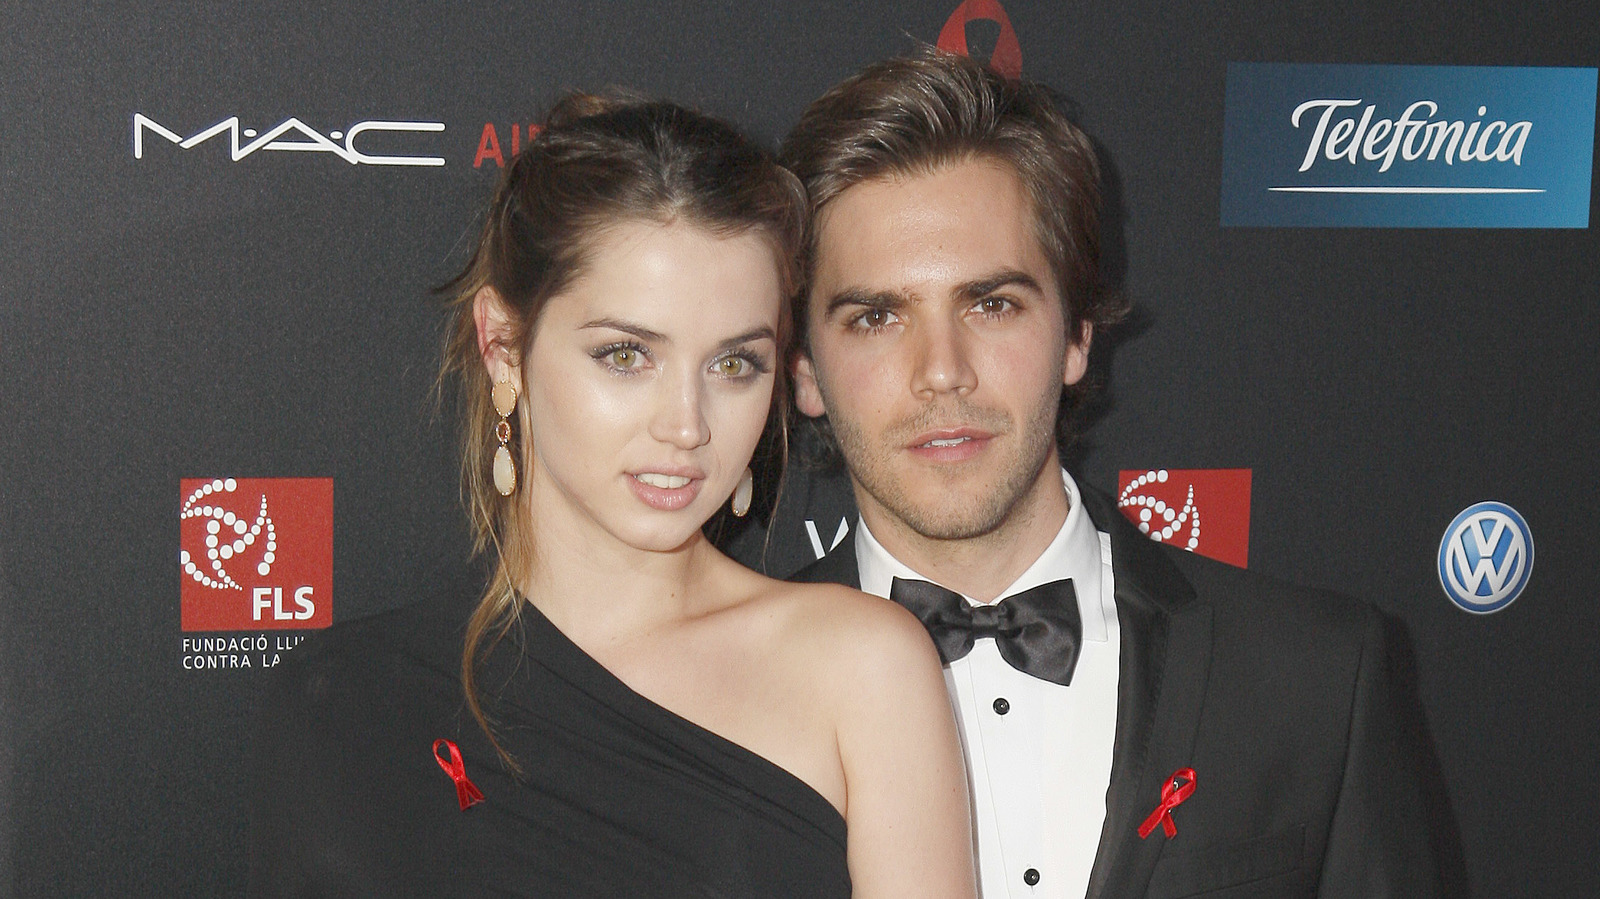 What You Don't Know About Ana De Armas' Ex-Husband